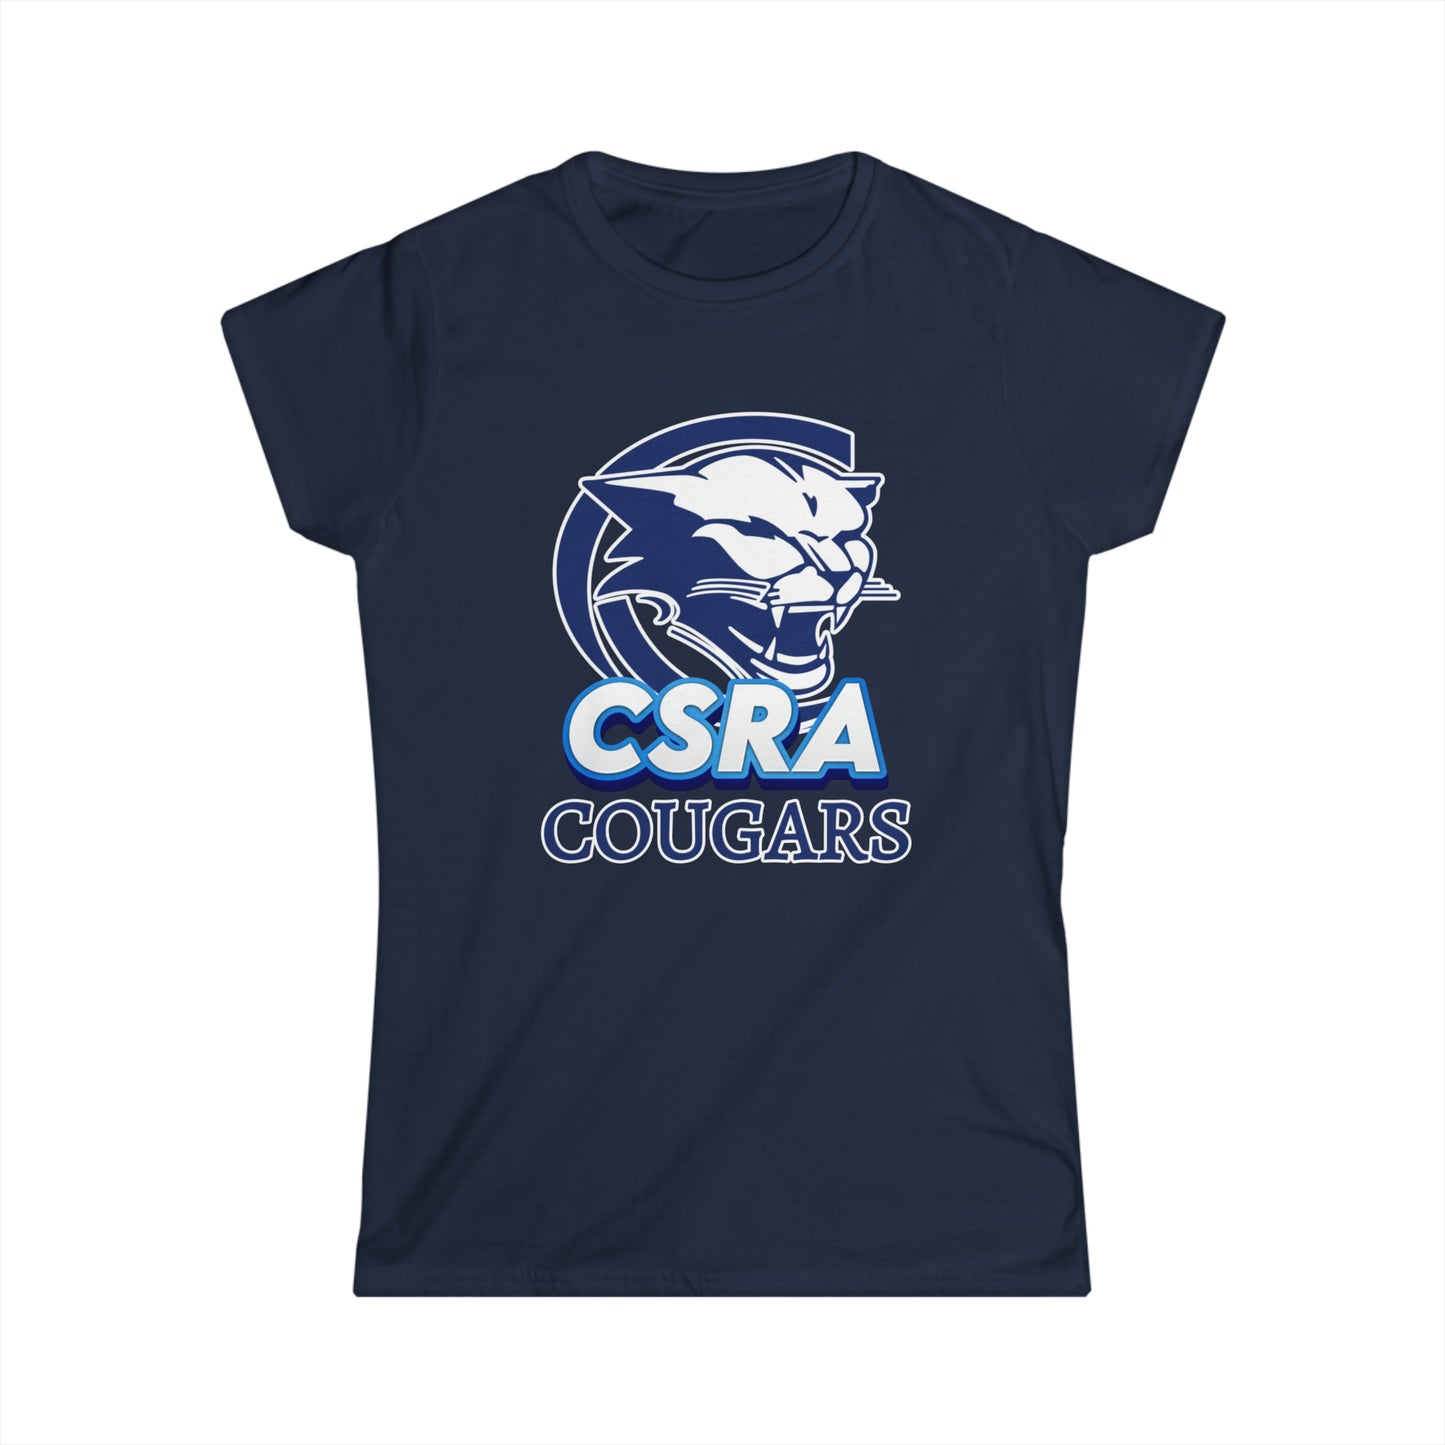 CSRA Cougars Women's Softstyle Tee